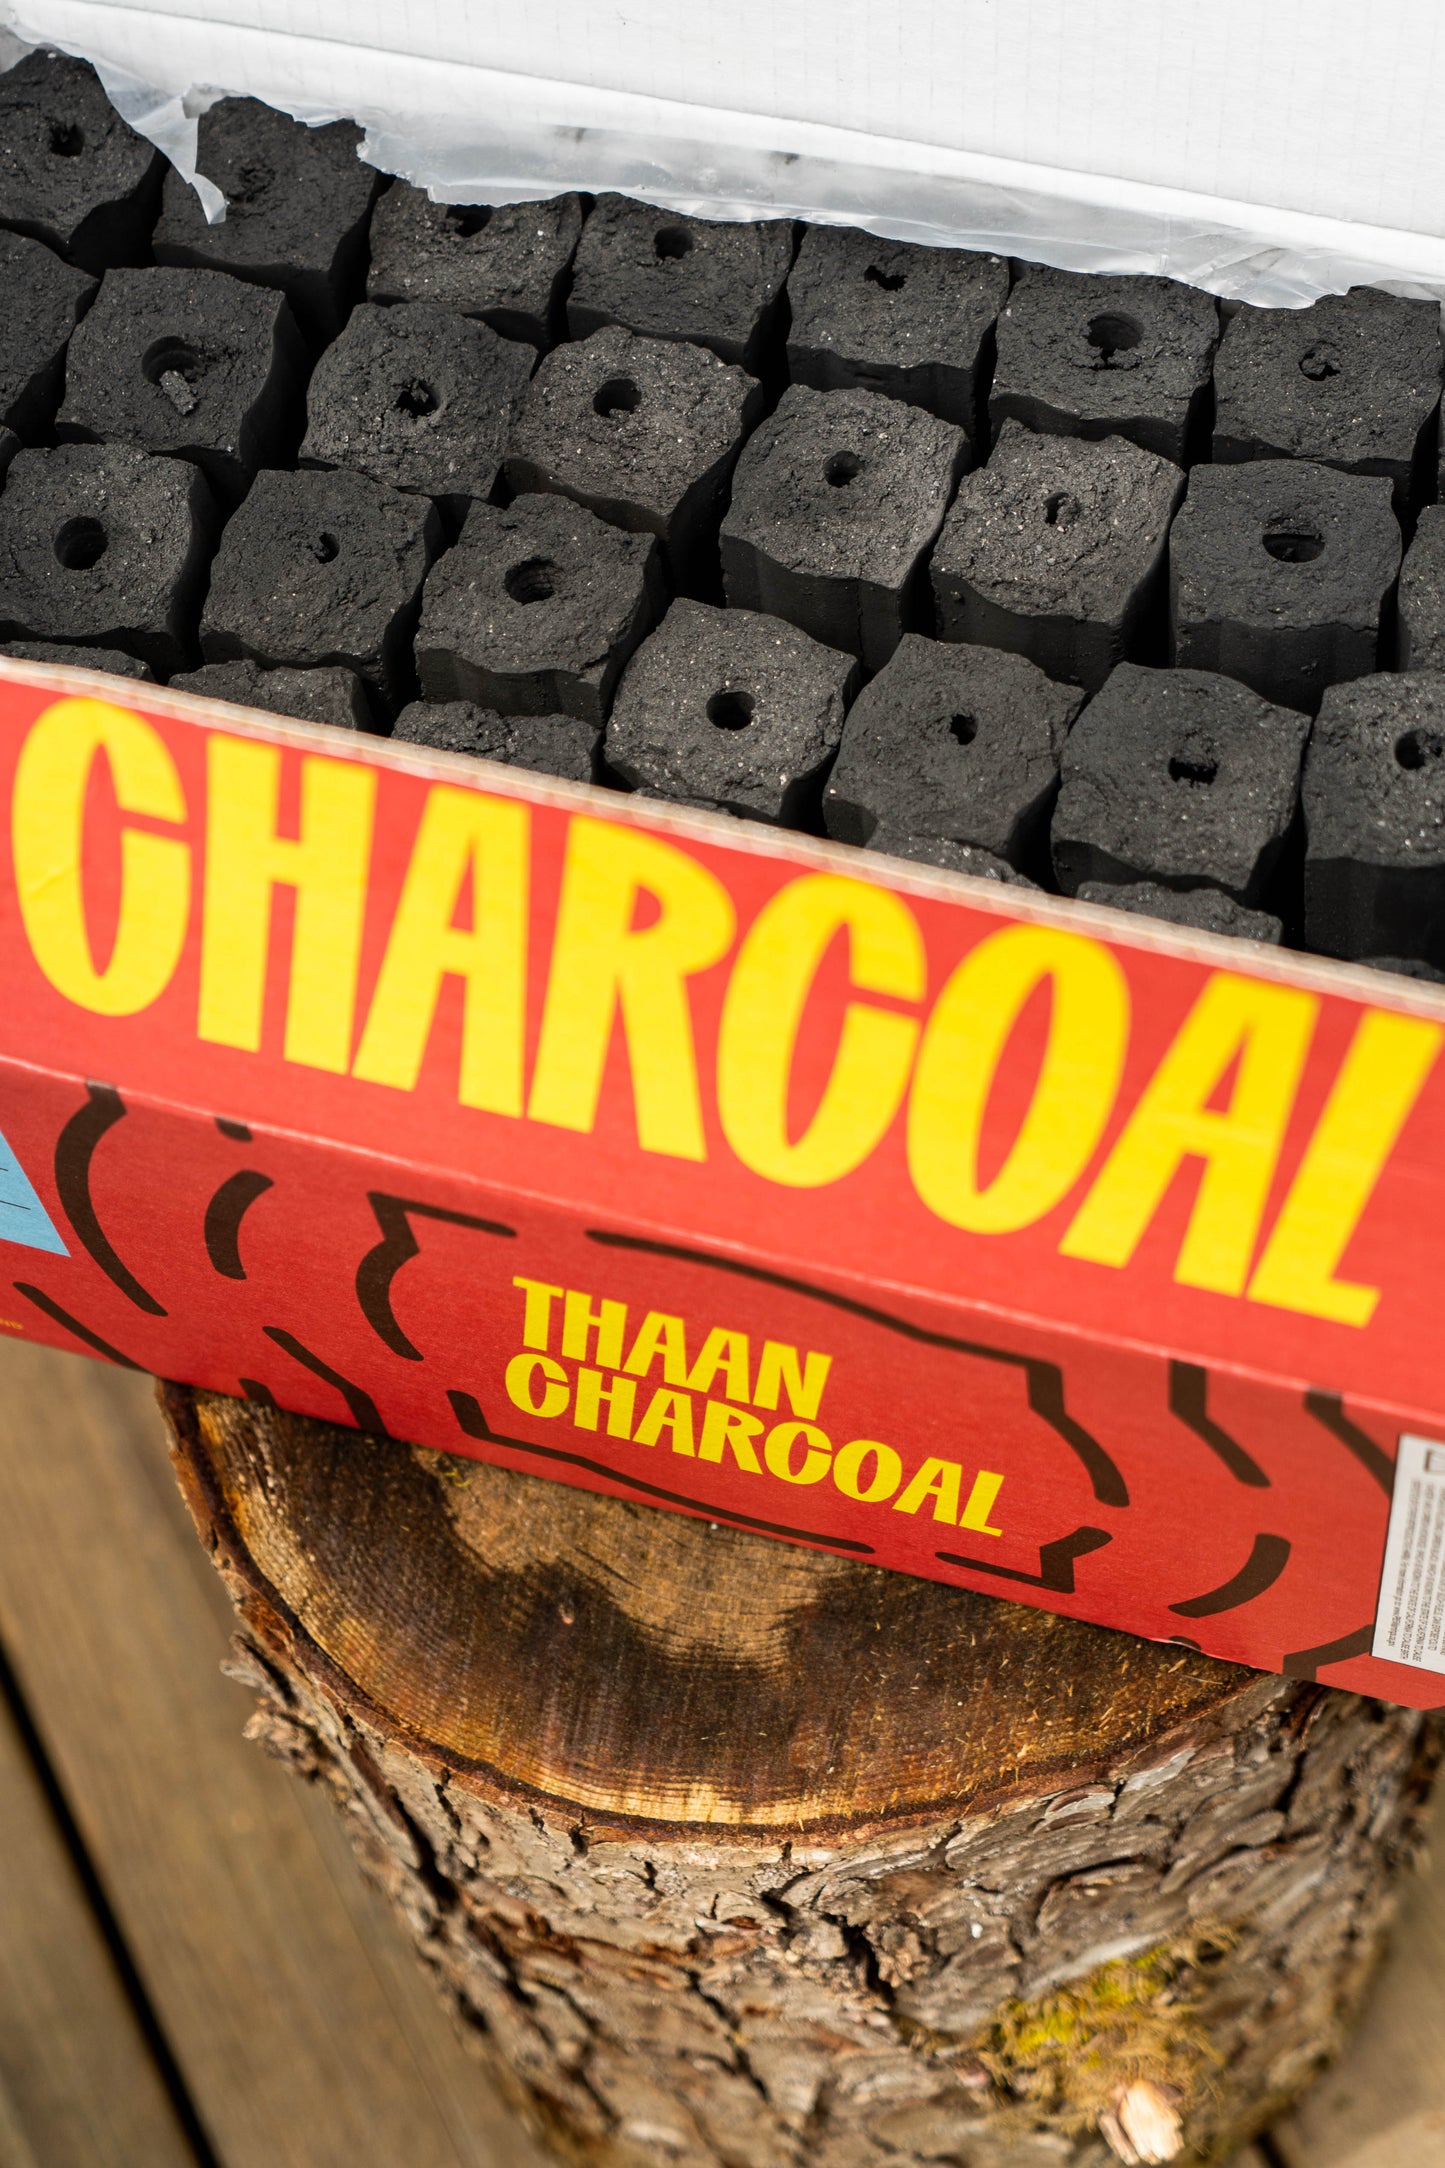 Thaan Charcoal, Chef's Choice Premium Grilling Charcoal, Log Style, 22lb